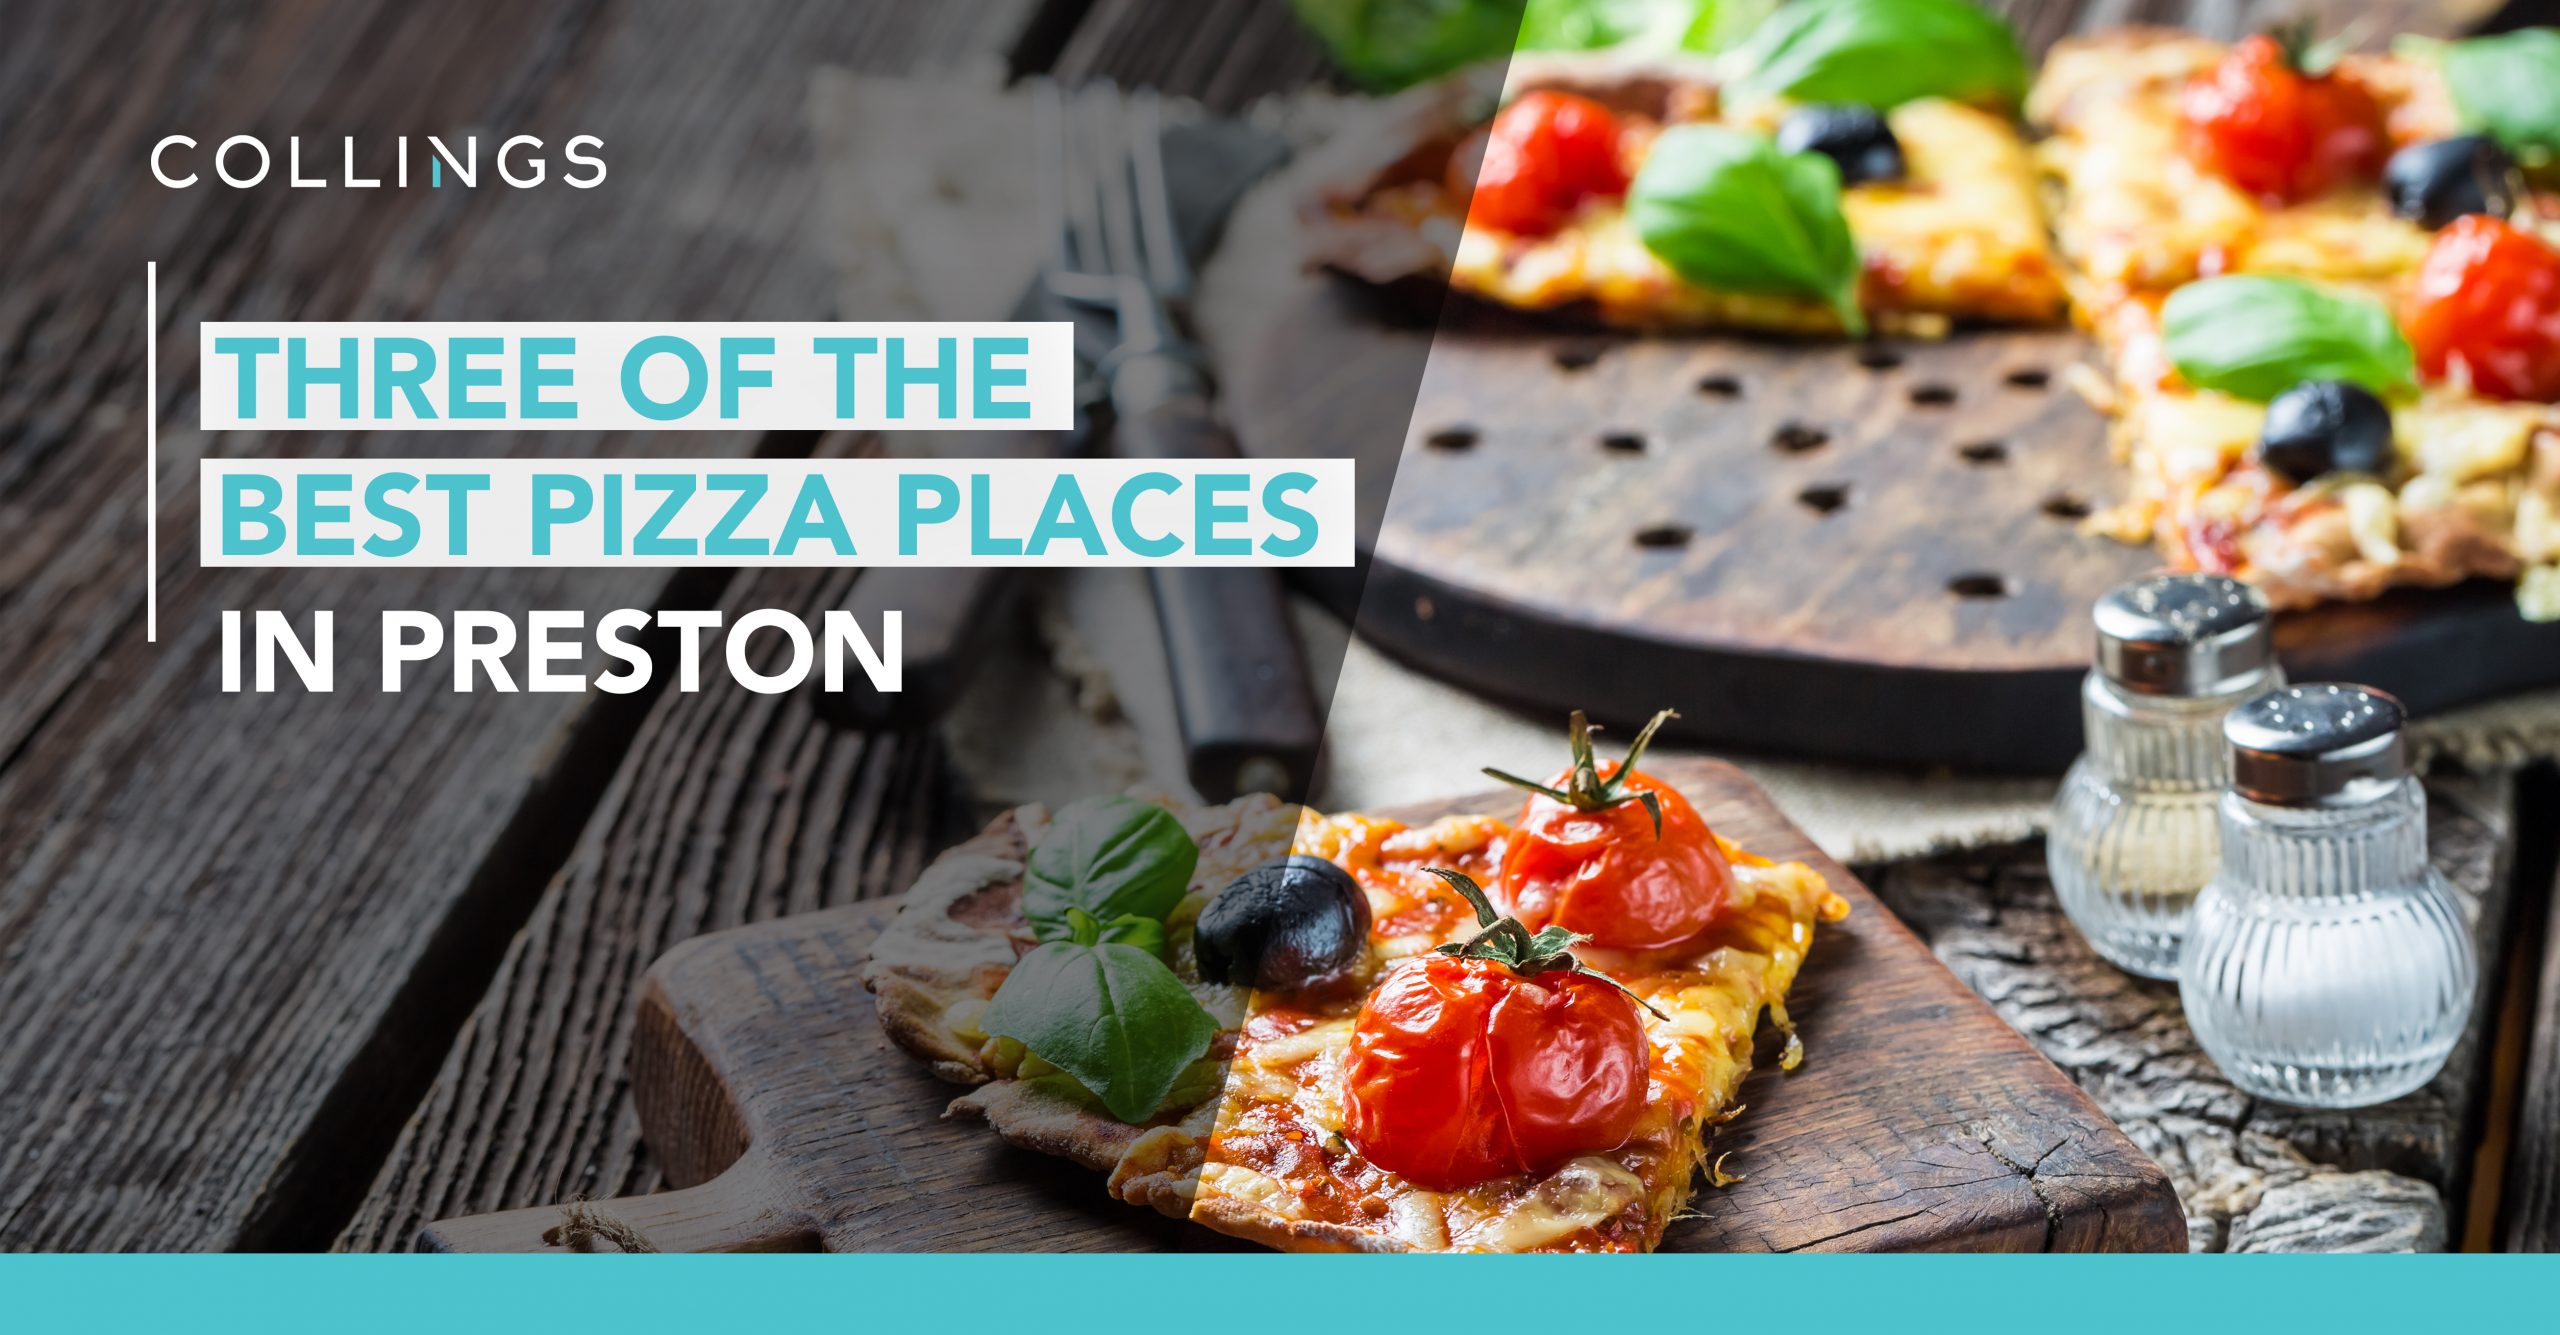 Three of the best pizza places in Preston